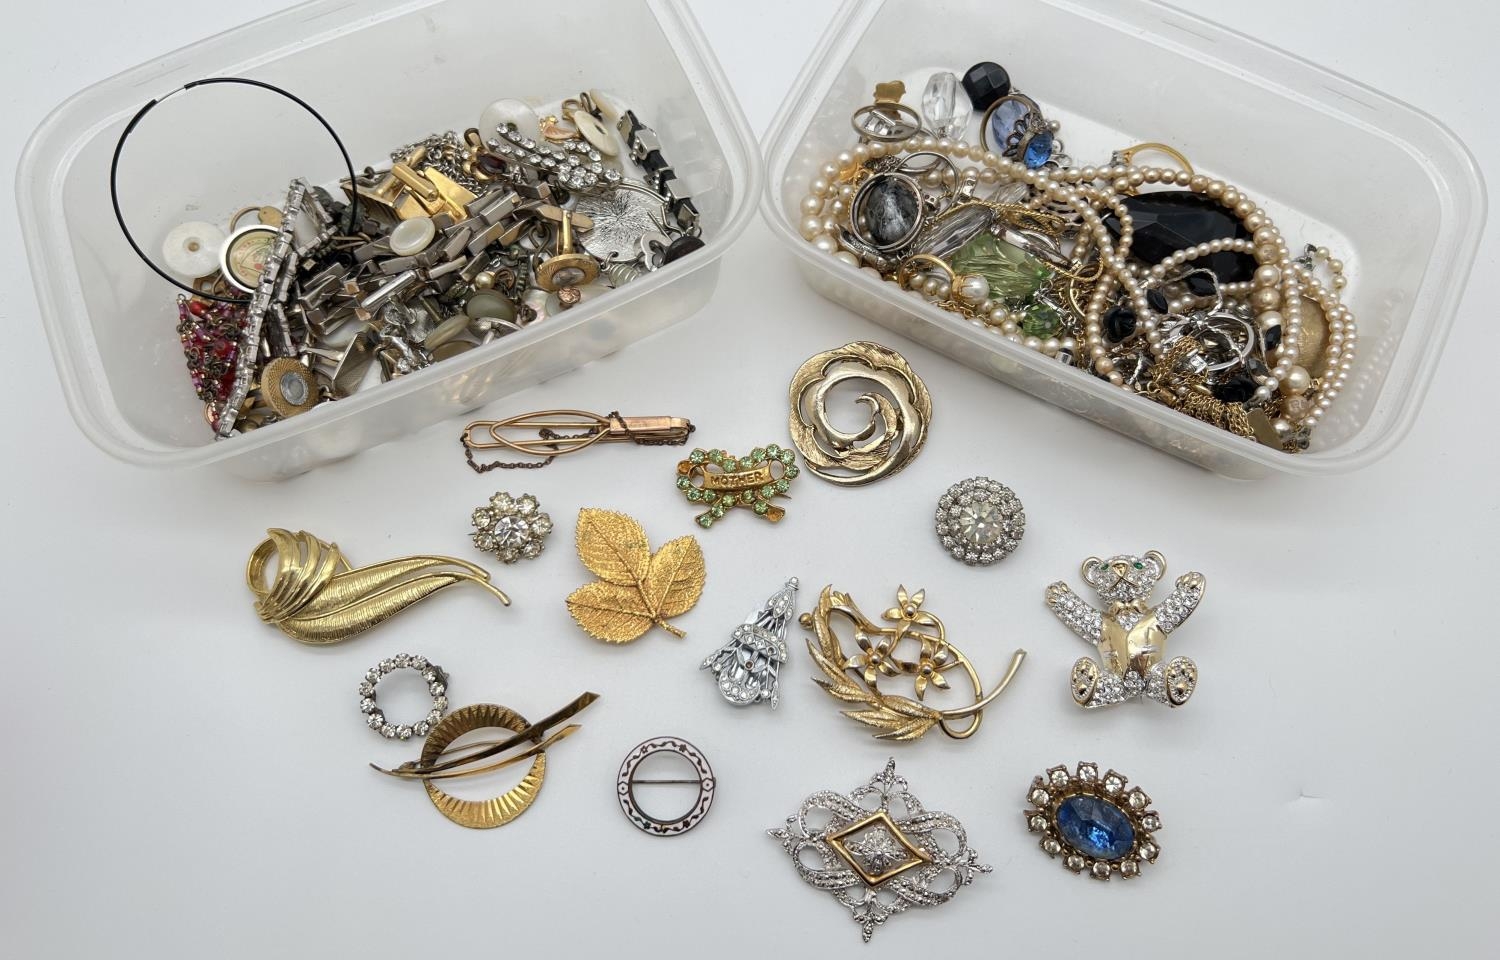 3 tubs of vintage and modern costume jewellery brooches, necklaces earrings, tie pins, cuff links